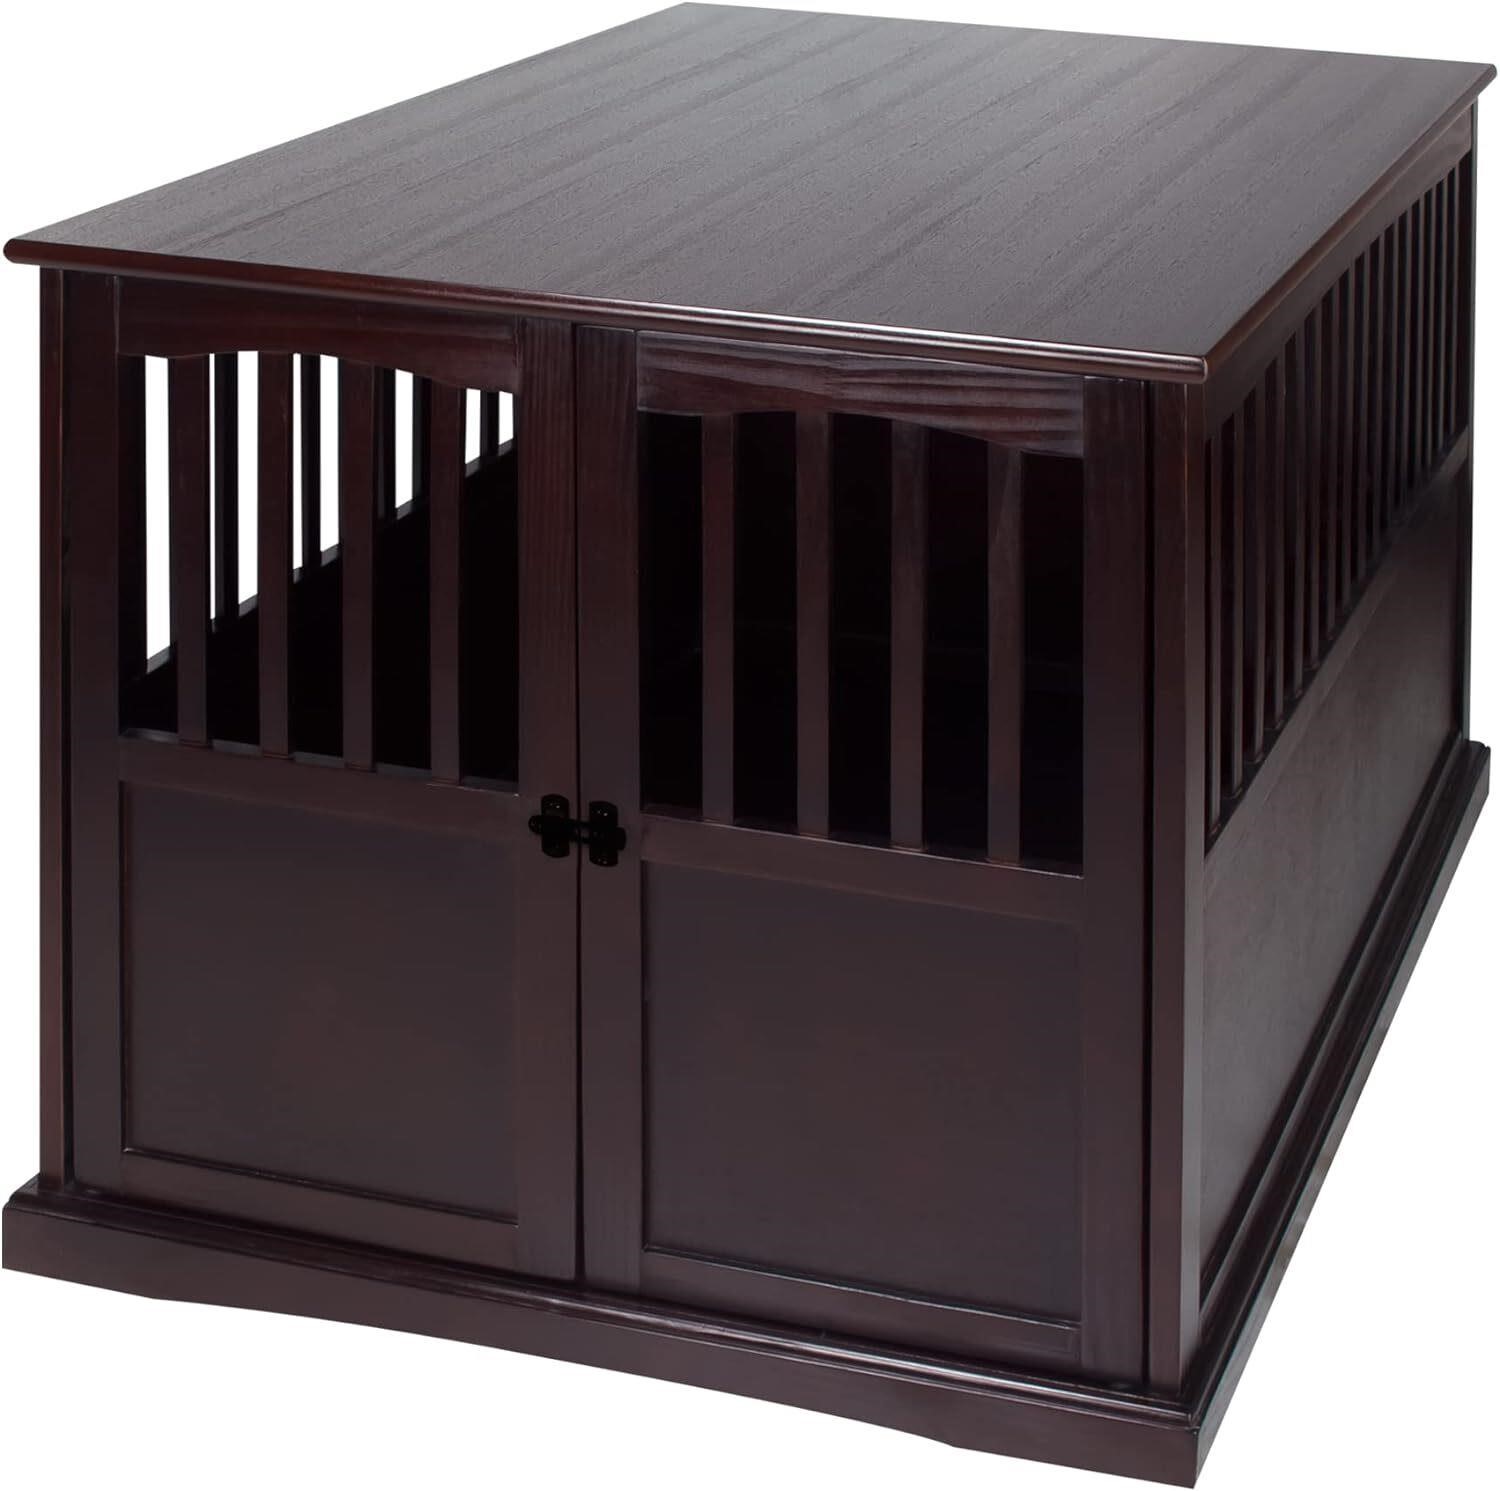 XL Pet Crate End Table 44.5L x 30W x 31.5H